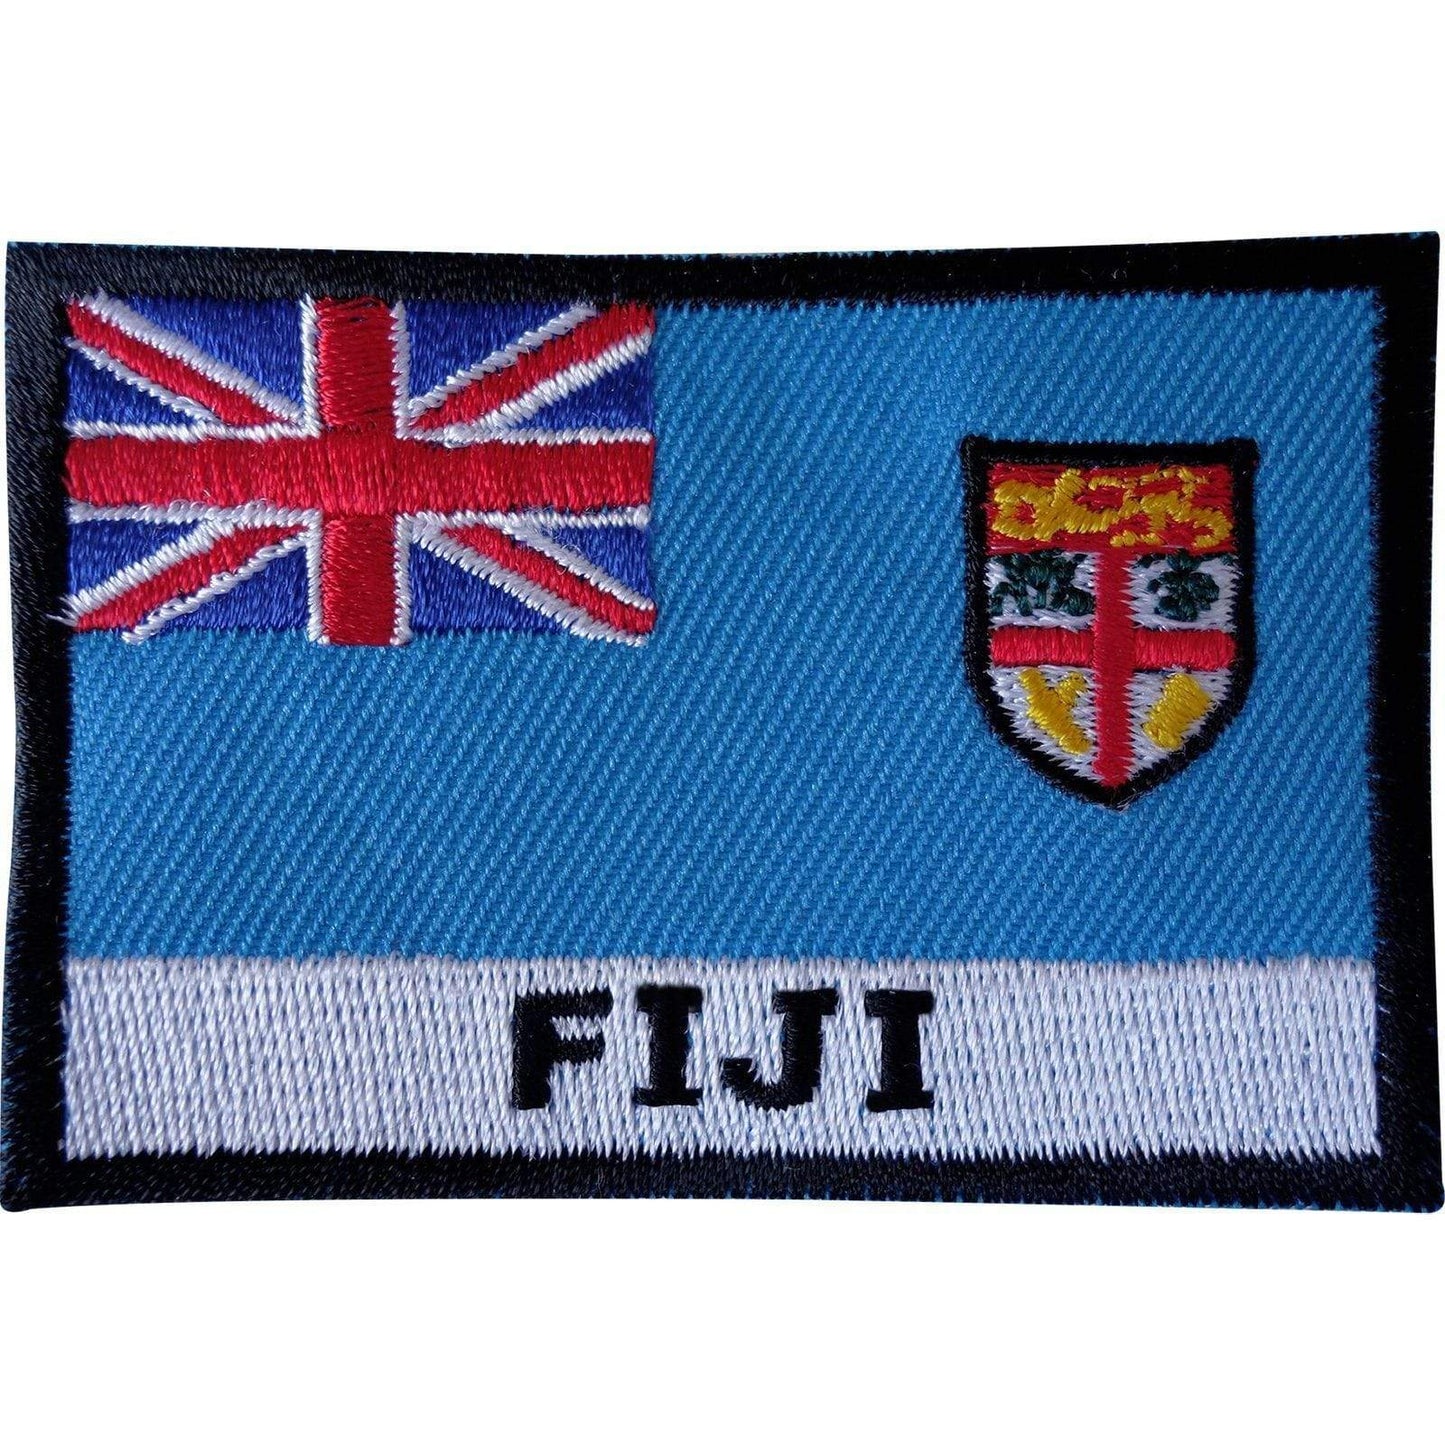 Embroidered Fiji Flag Patch Sew On Cloth Jacket Jeans Bag Shirt Embroidery Badge